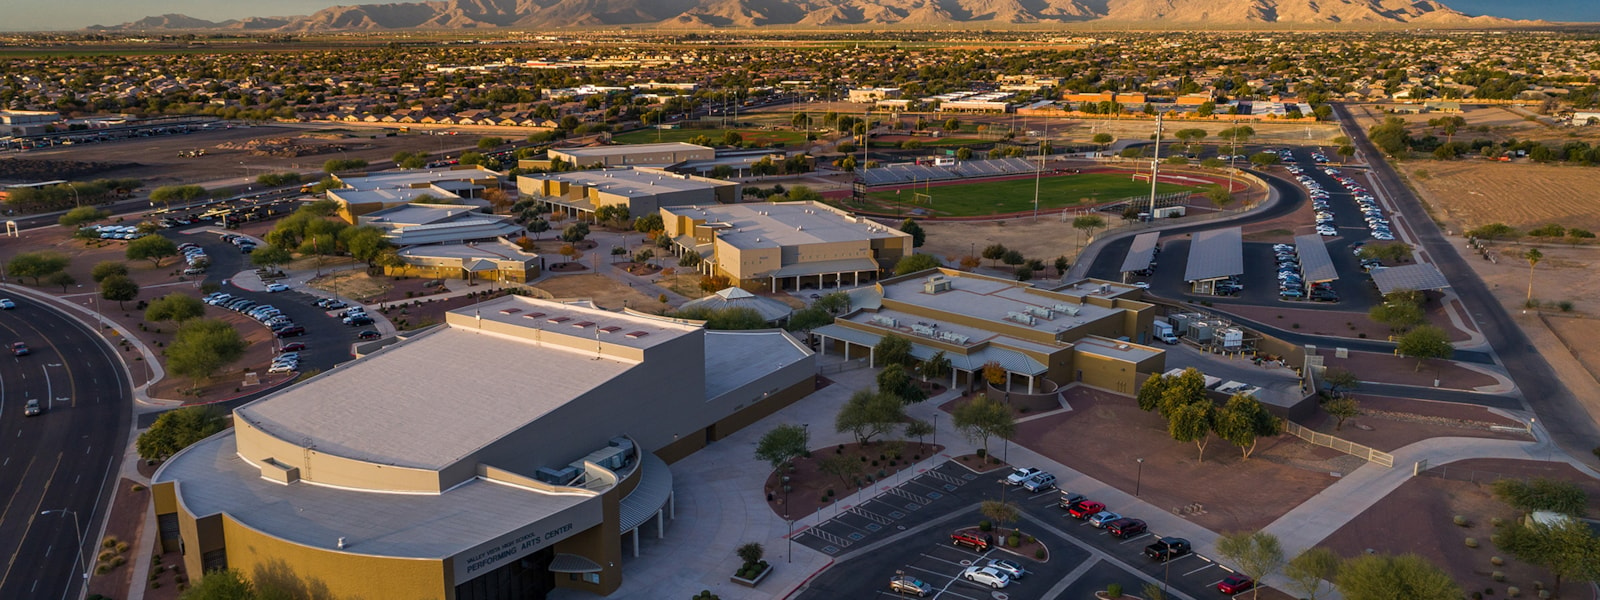 Overhead view of the Valley Vista Campus